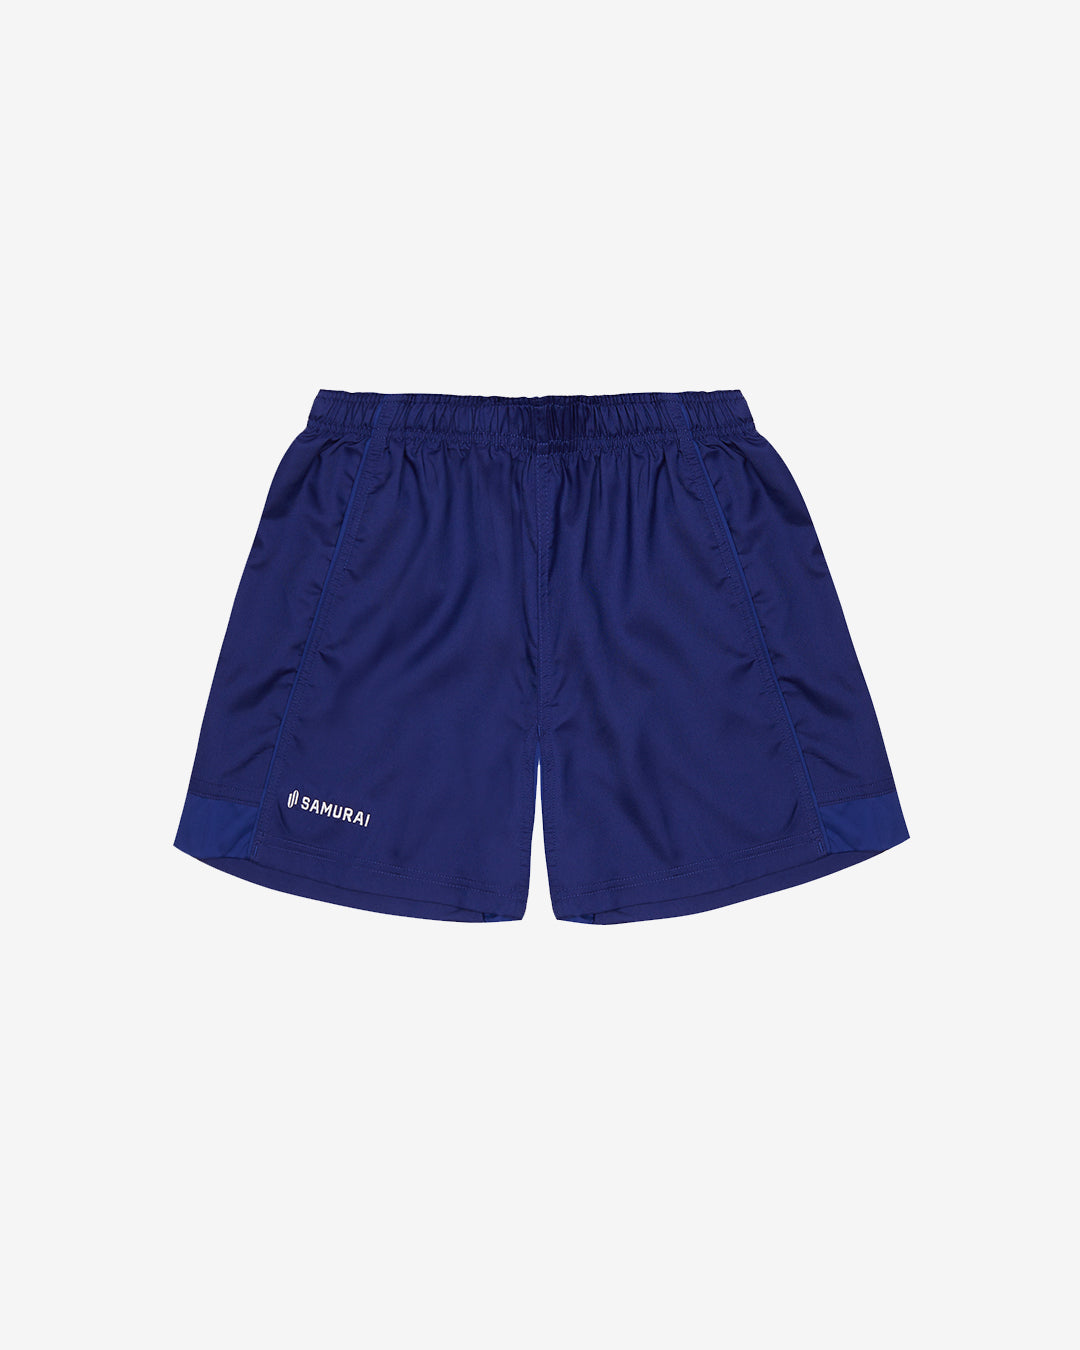 EP:0119 - Rugby Shorts - Royal Blue